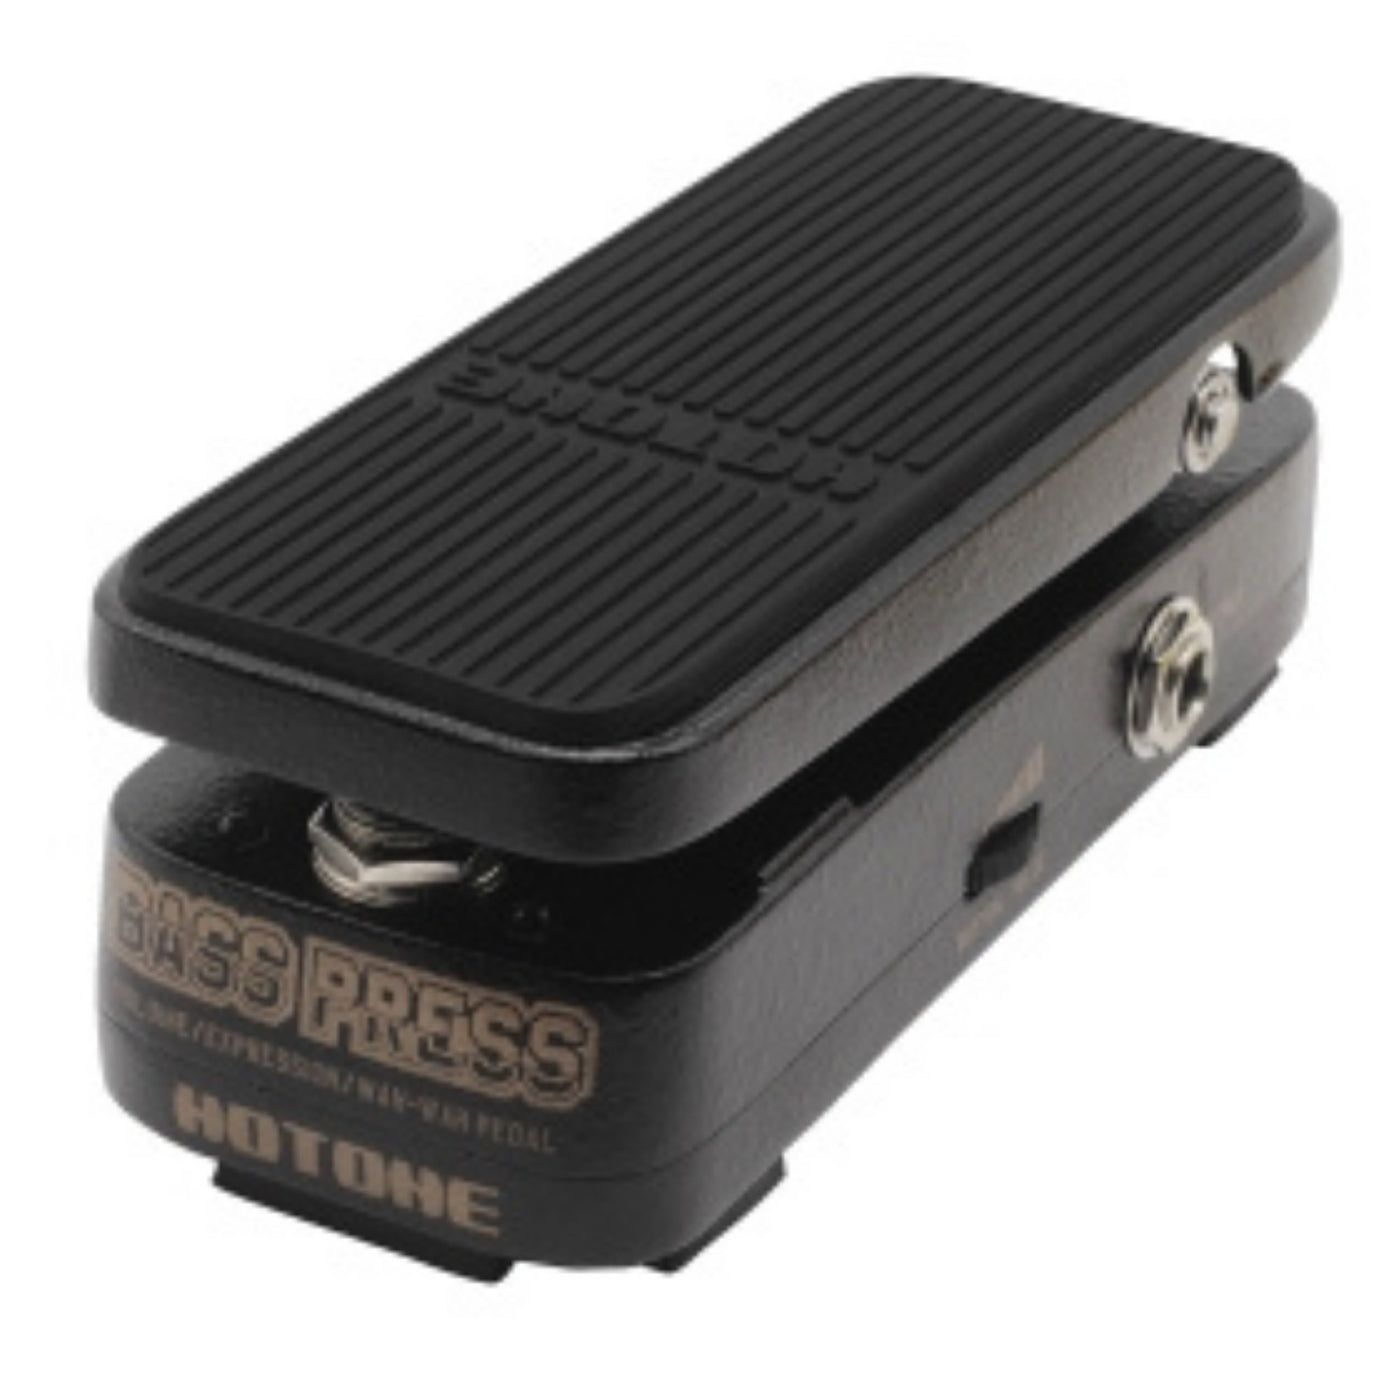 Hotone Bass Press 3 in 1 Pedal, Volume/Expression/Wah